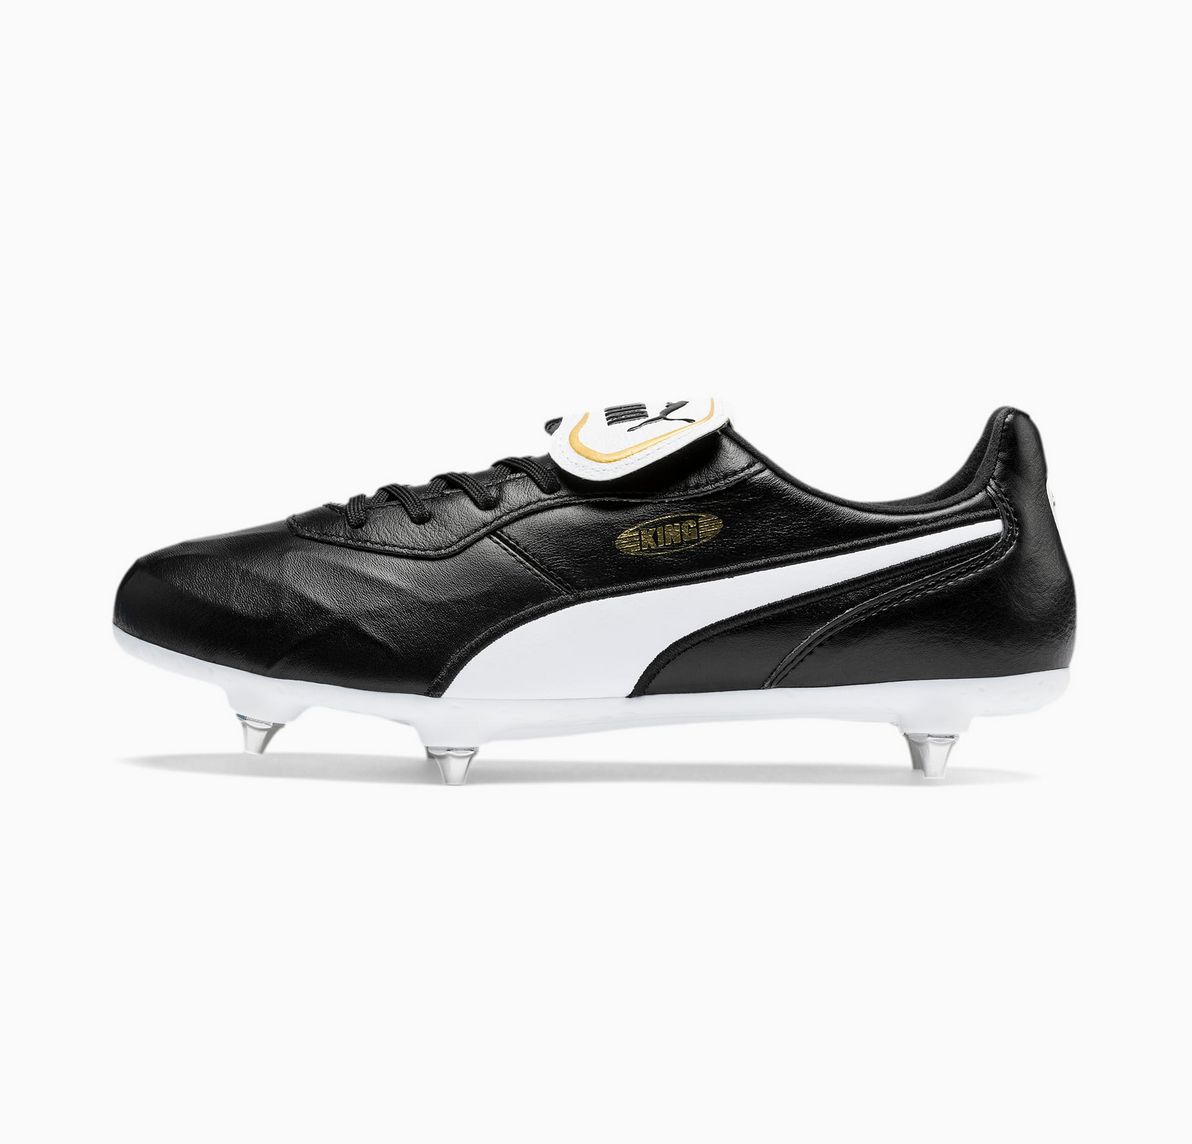 Puma KING SG Football Boots | The Rugby Shop